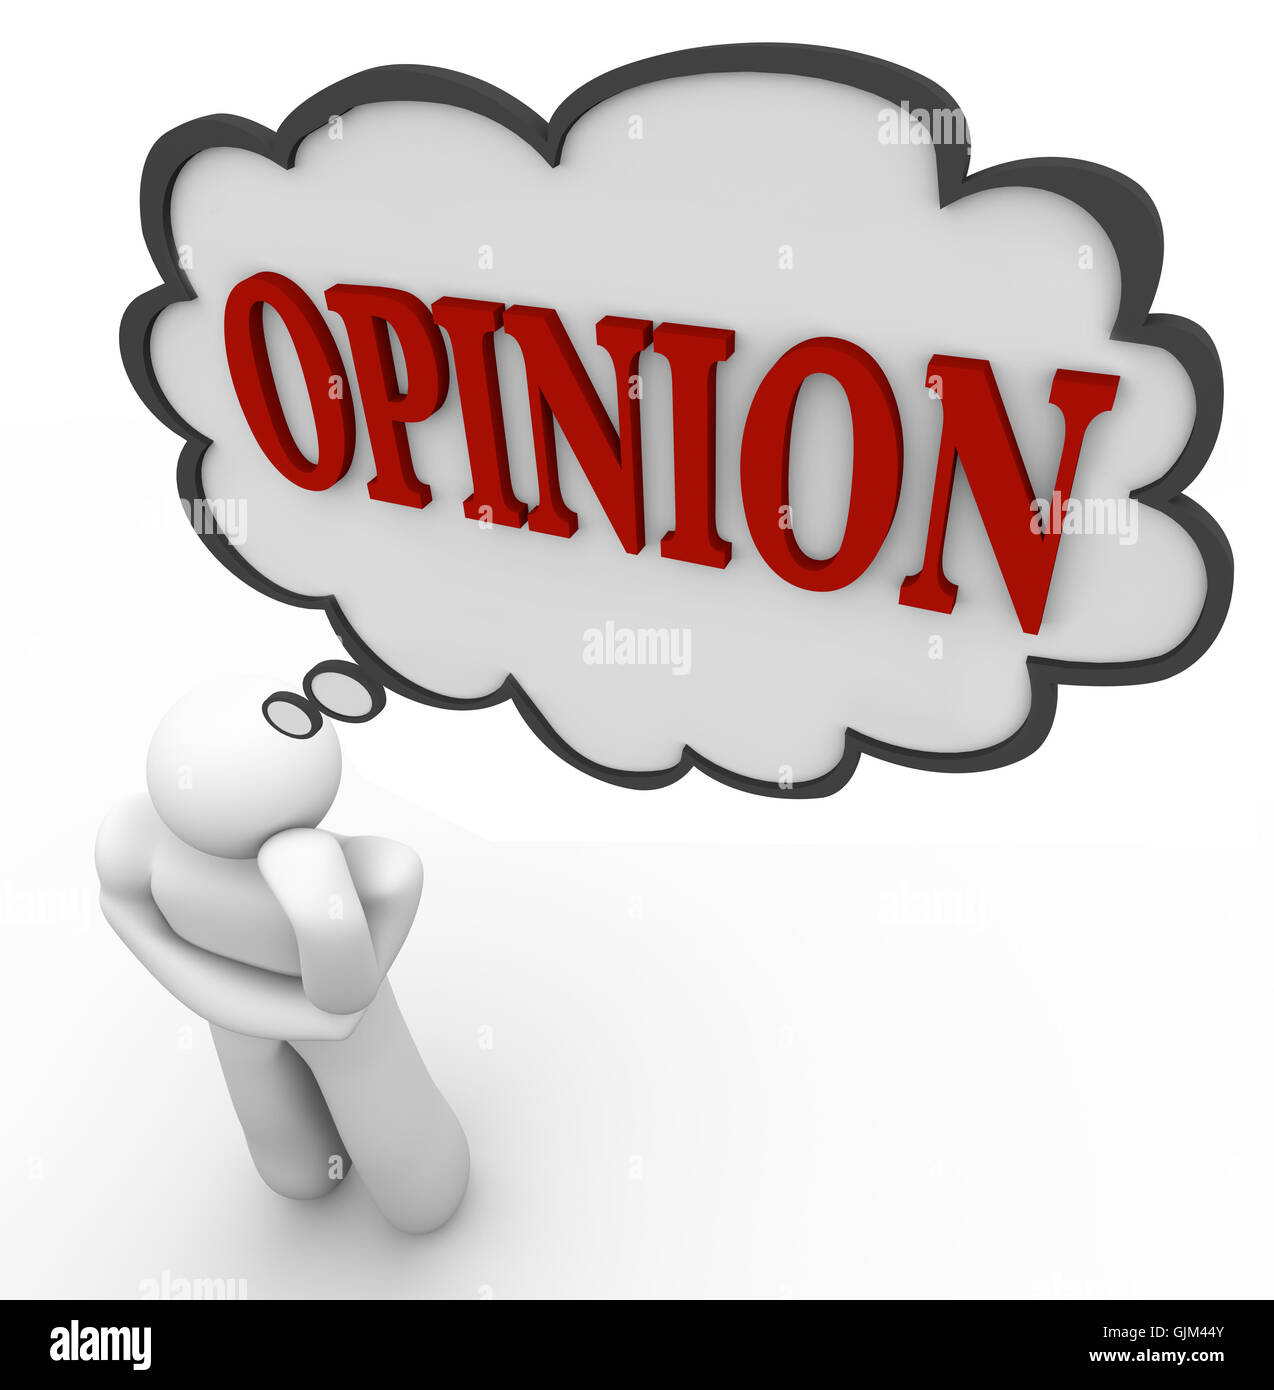 Person Thinks of Opinion Word in Thought Bubble Stock Photo